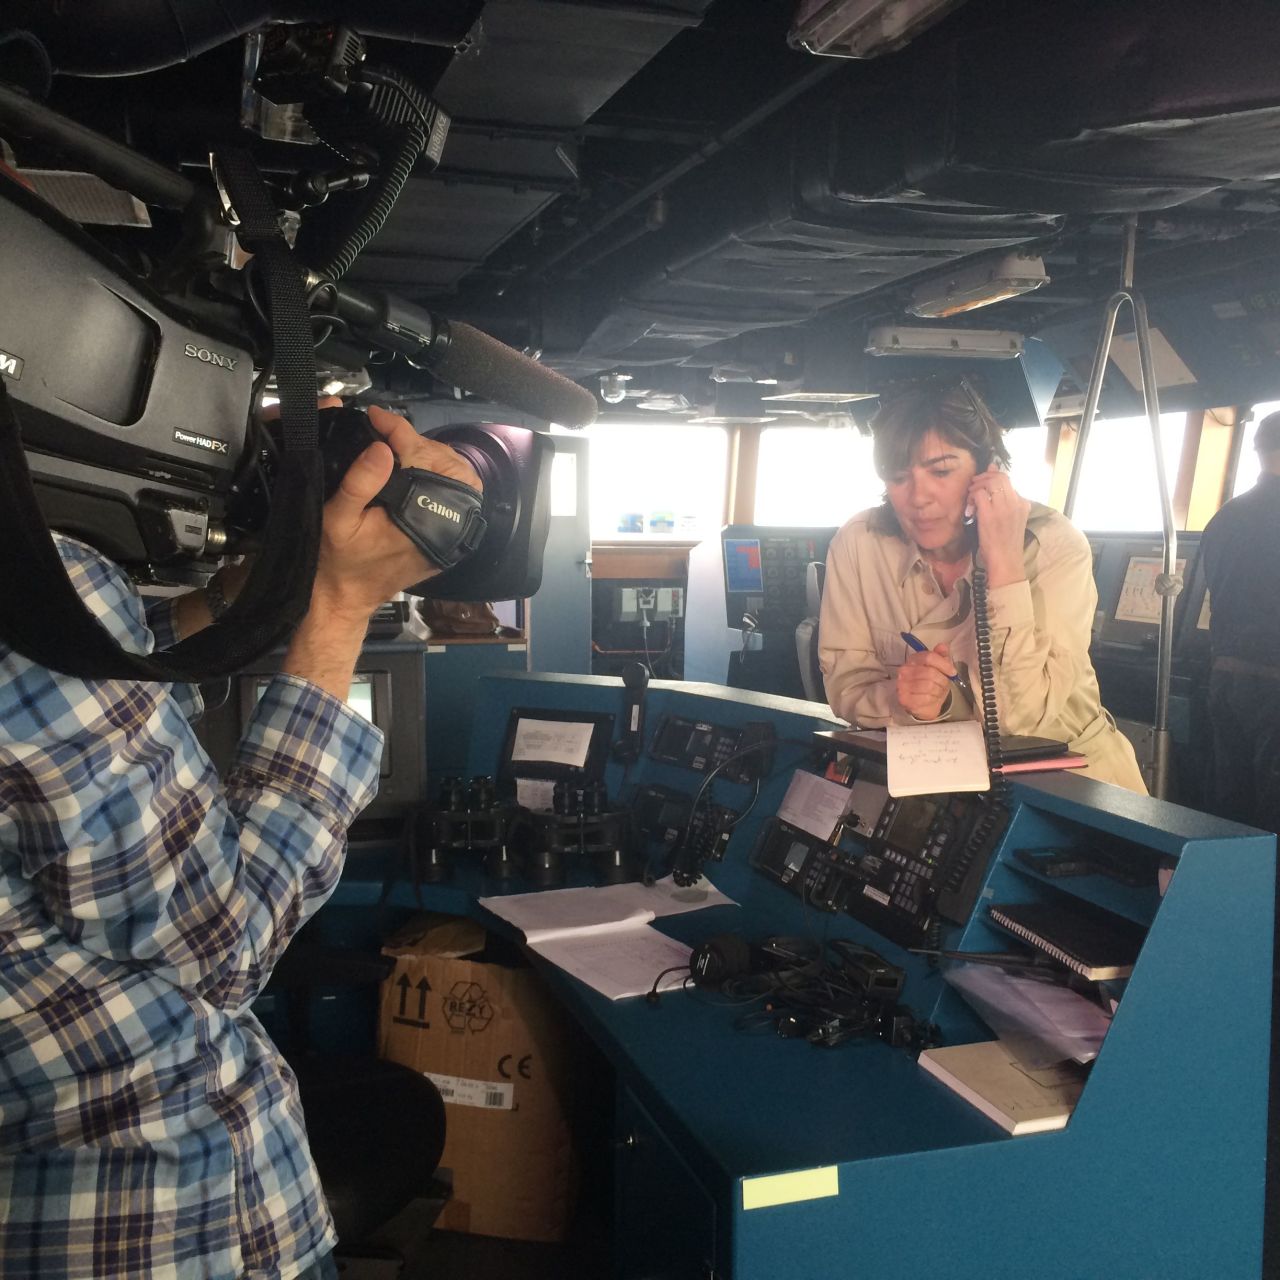 The only way to communicate with the outside world from the middle of the sea is satellite phone. Here, Amanpour stands on the bridge of the frigate Virginio Fasan while <a href="http://www.cnn.com/video/data/2.0/video/world/2015/05/20/amanpour-mediterranean-beeper.cnn.html" target="_blank">she speaks with CNN's Hala Gorani</a>.